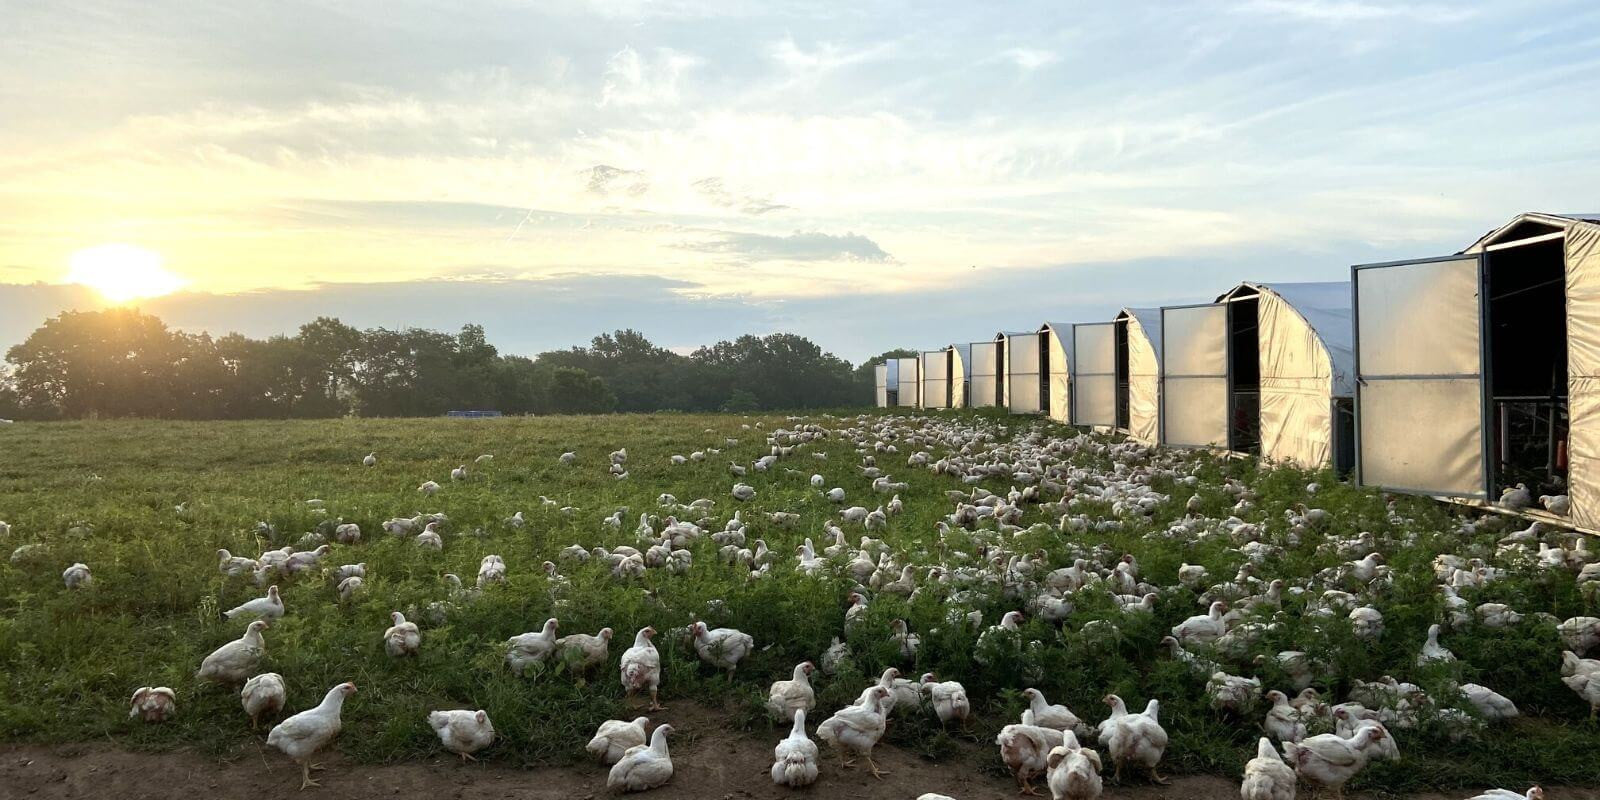 How many tips do you know for cooling chicken farms in summer?